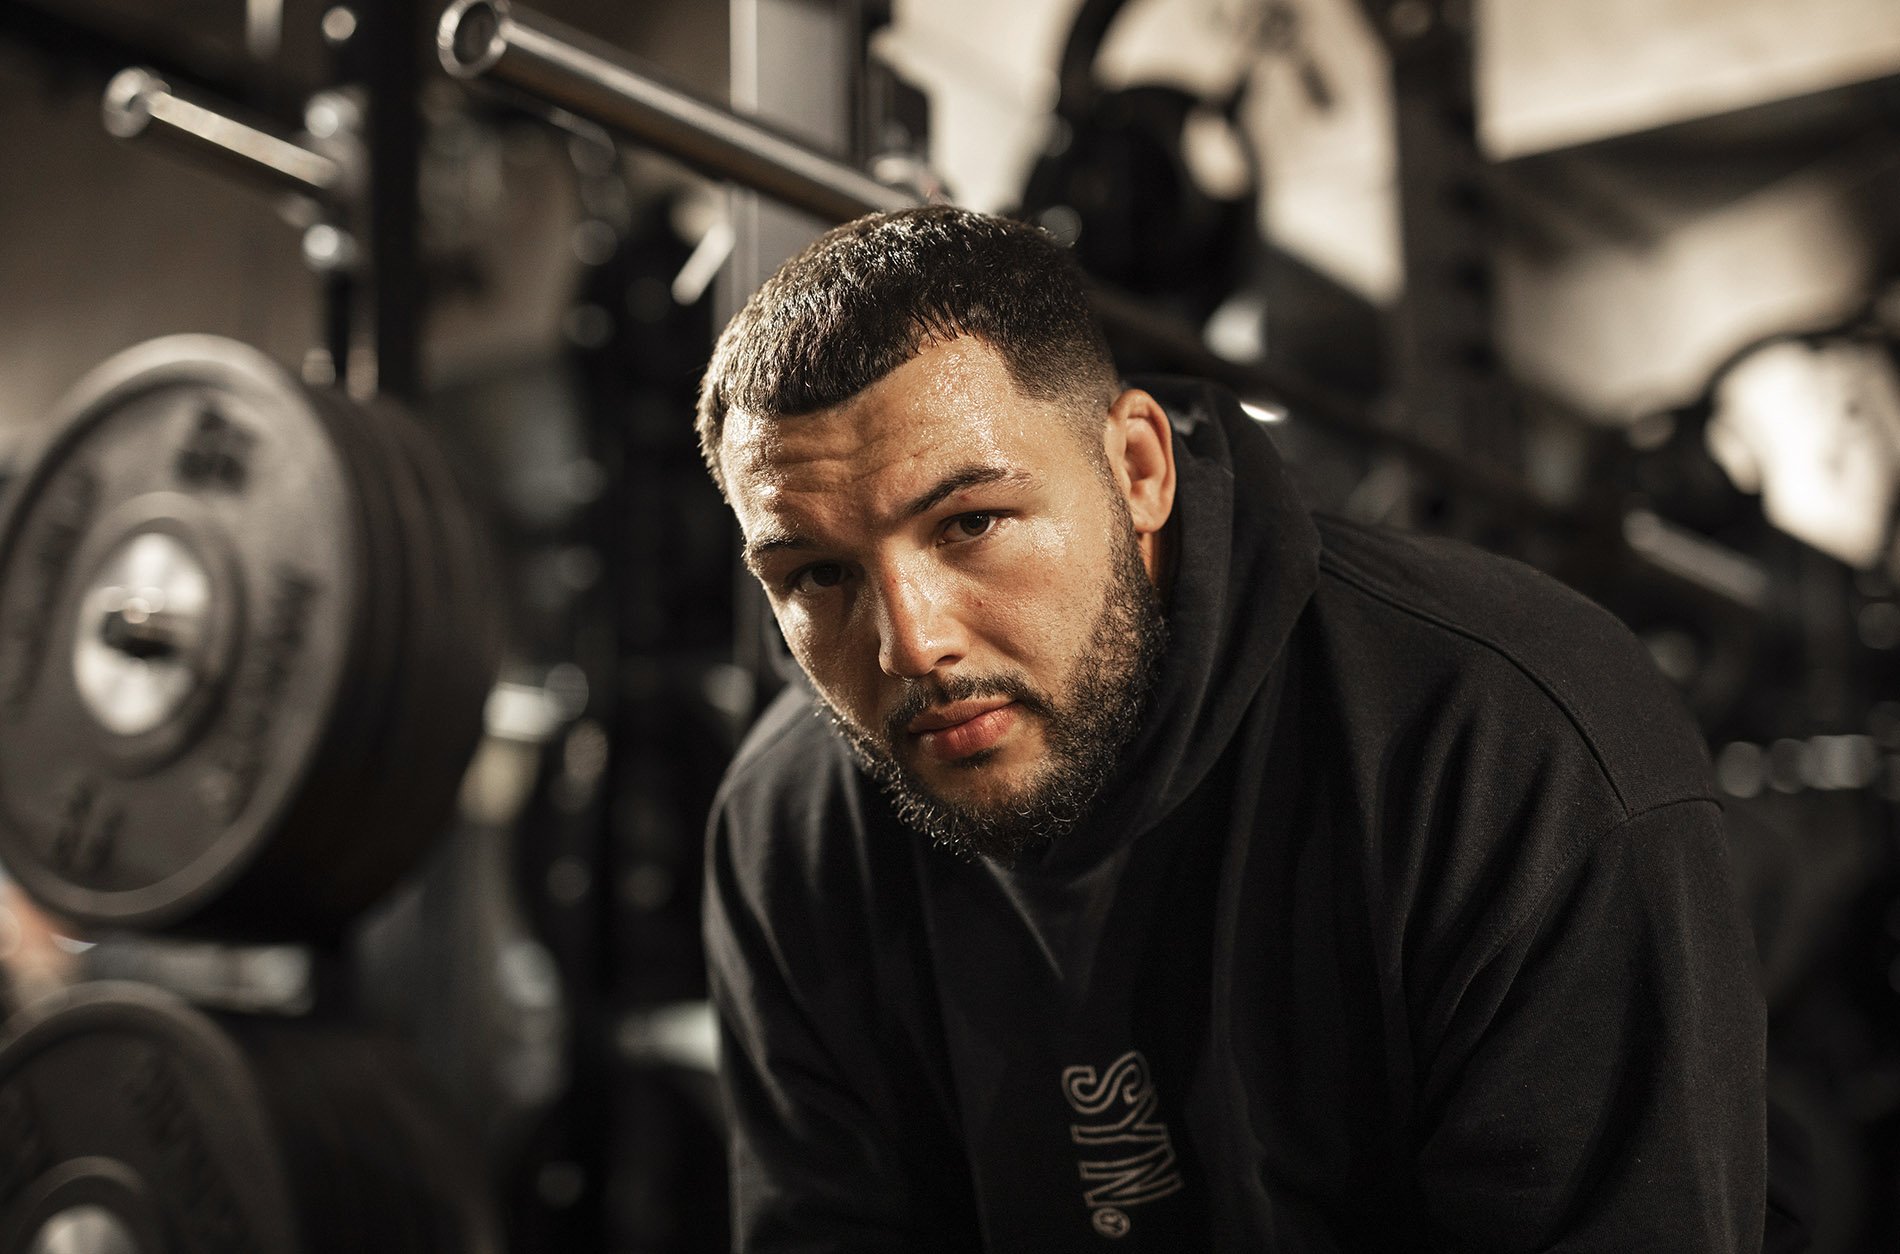  England rugby player Ellis Genge in his gym in Leicester. 